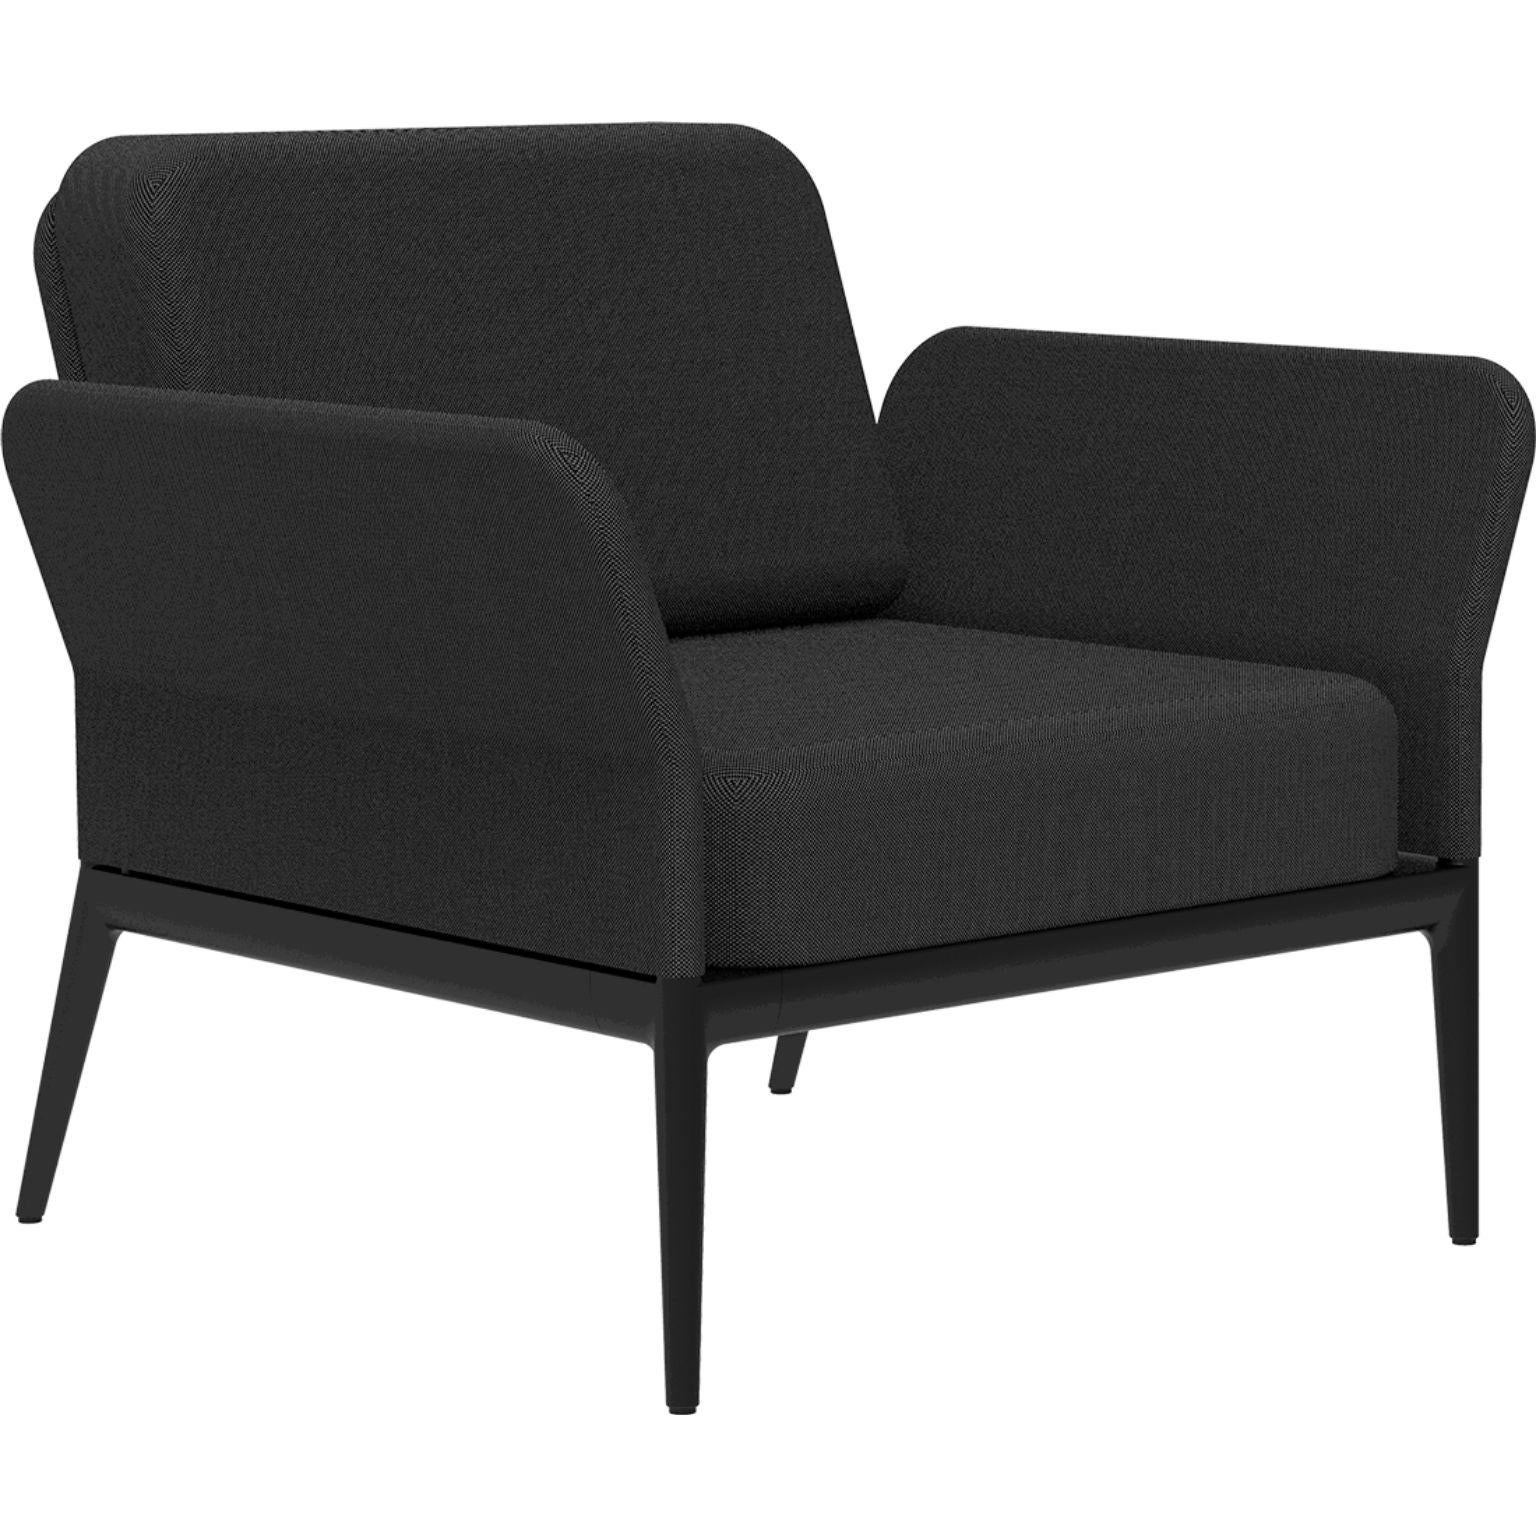 Cover Black Longue Chair by MOWEE
Dimensions: D83 x W91 x H81 cm (seat height 42 cm).
Material: Aluminum and upholstery.
Weight: 20 kg.
Also available in different colors and finishes. 

An unmistakable collection for its beauty and